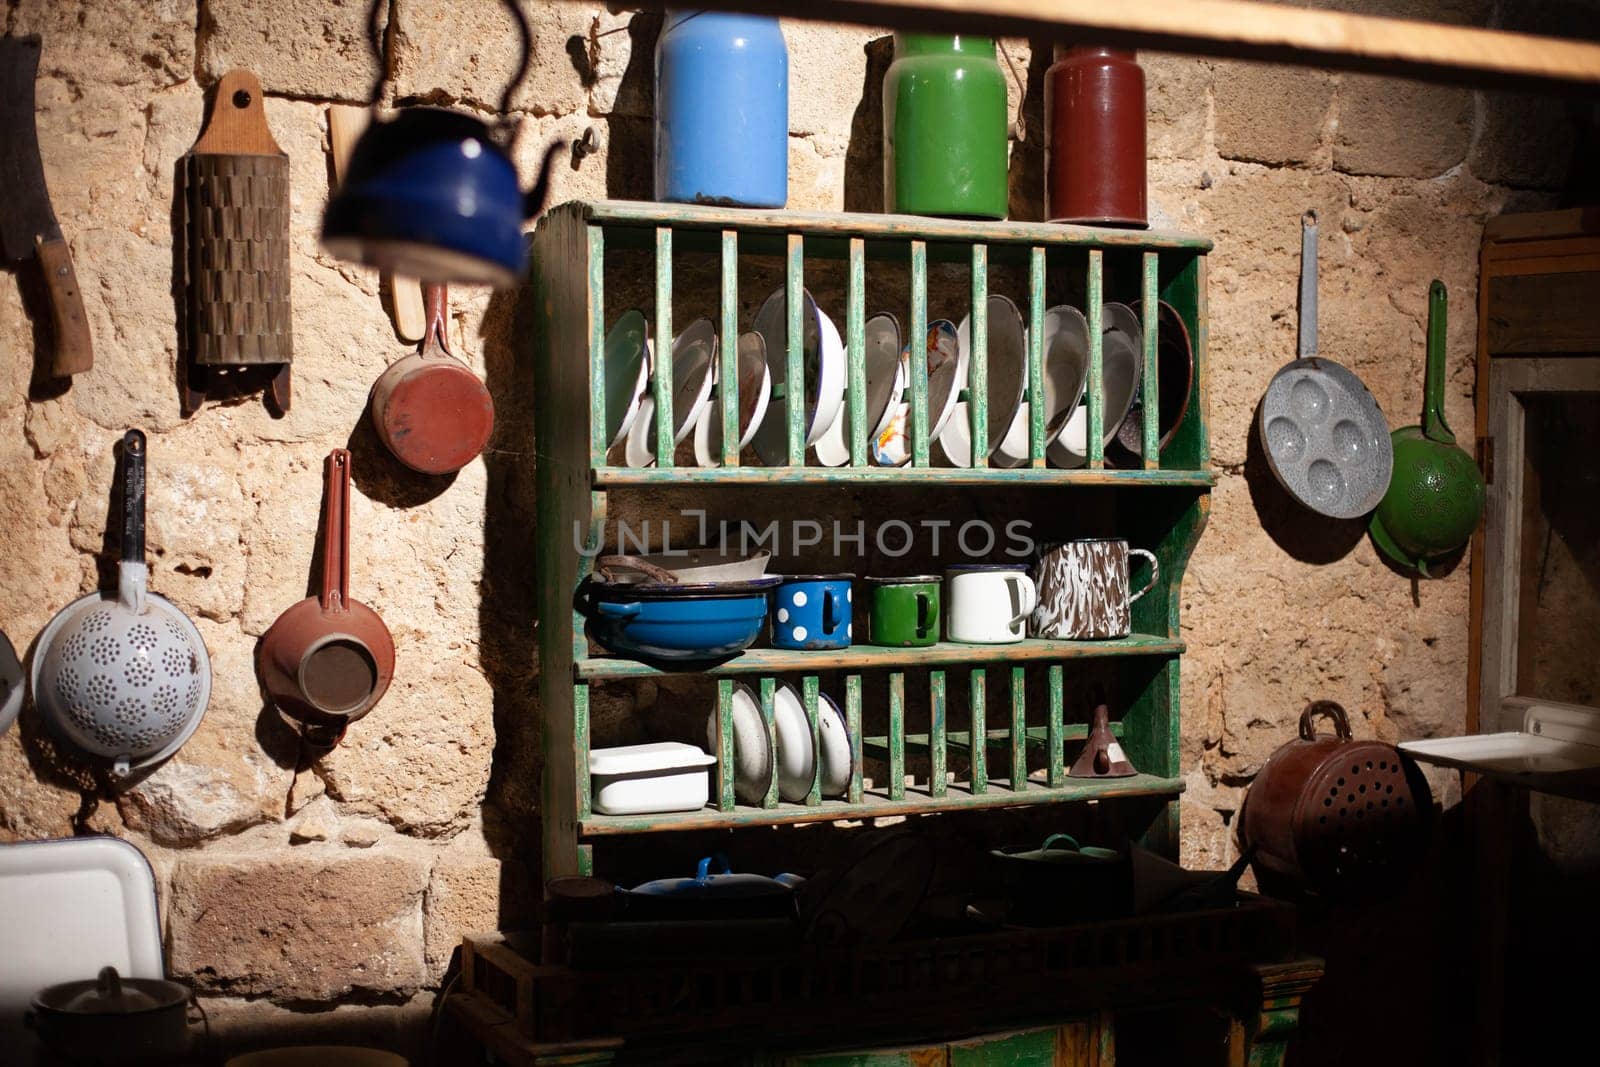 Antique kitchenware in a Middle Eastern home by gordiza